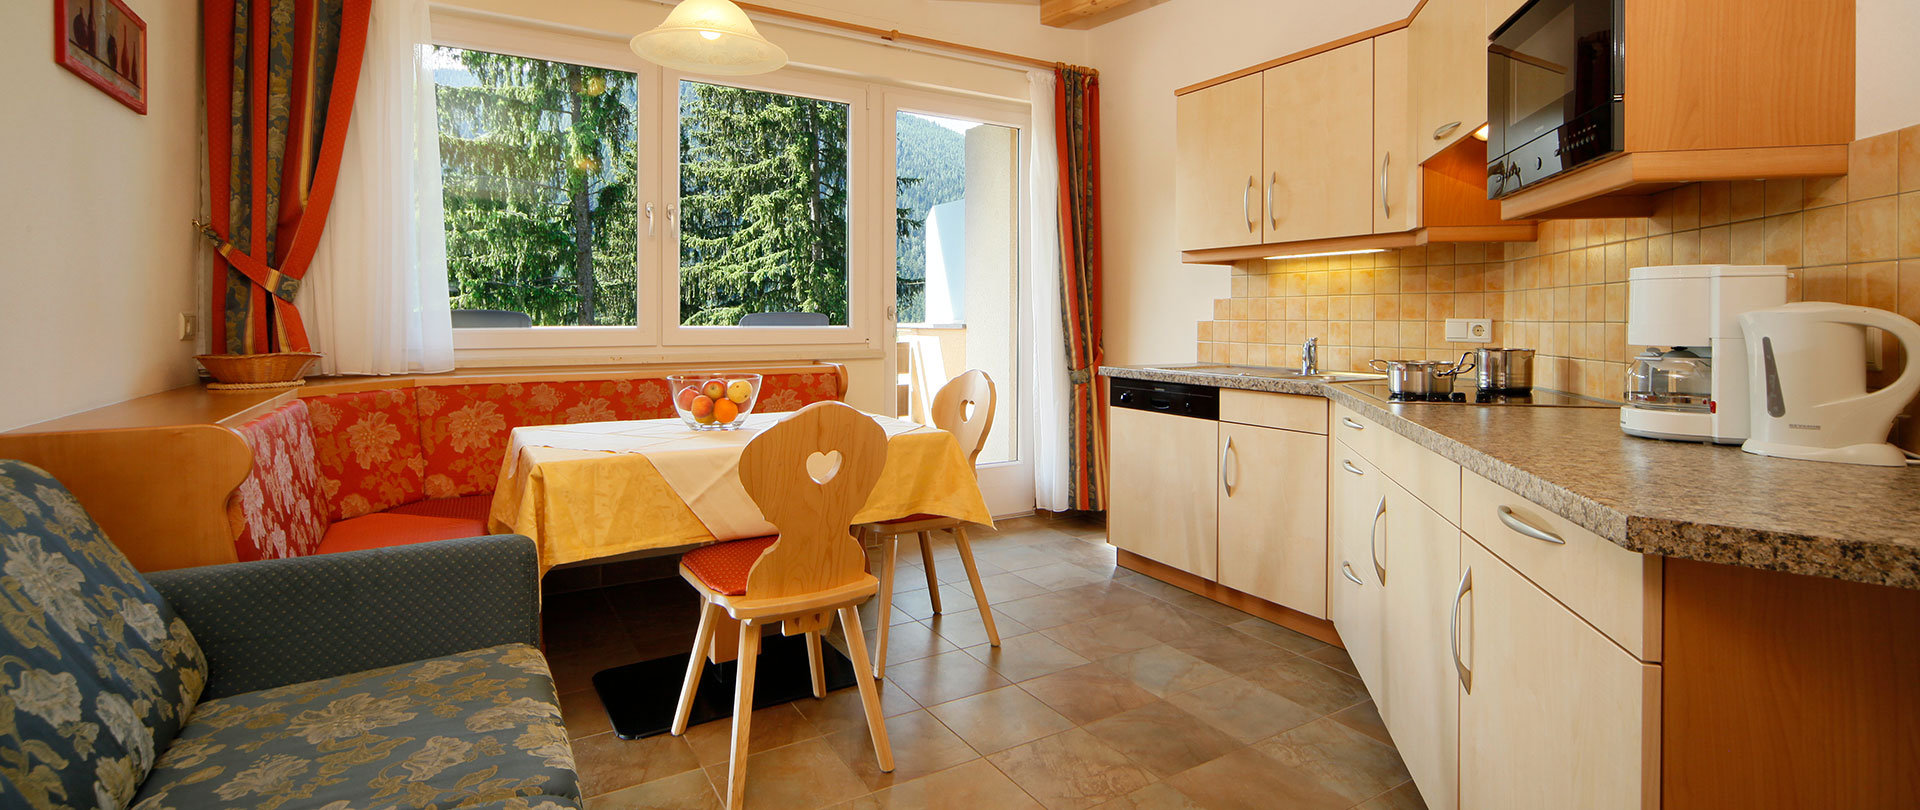 The Dolomit holiday apartment